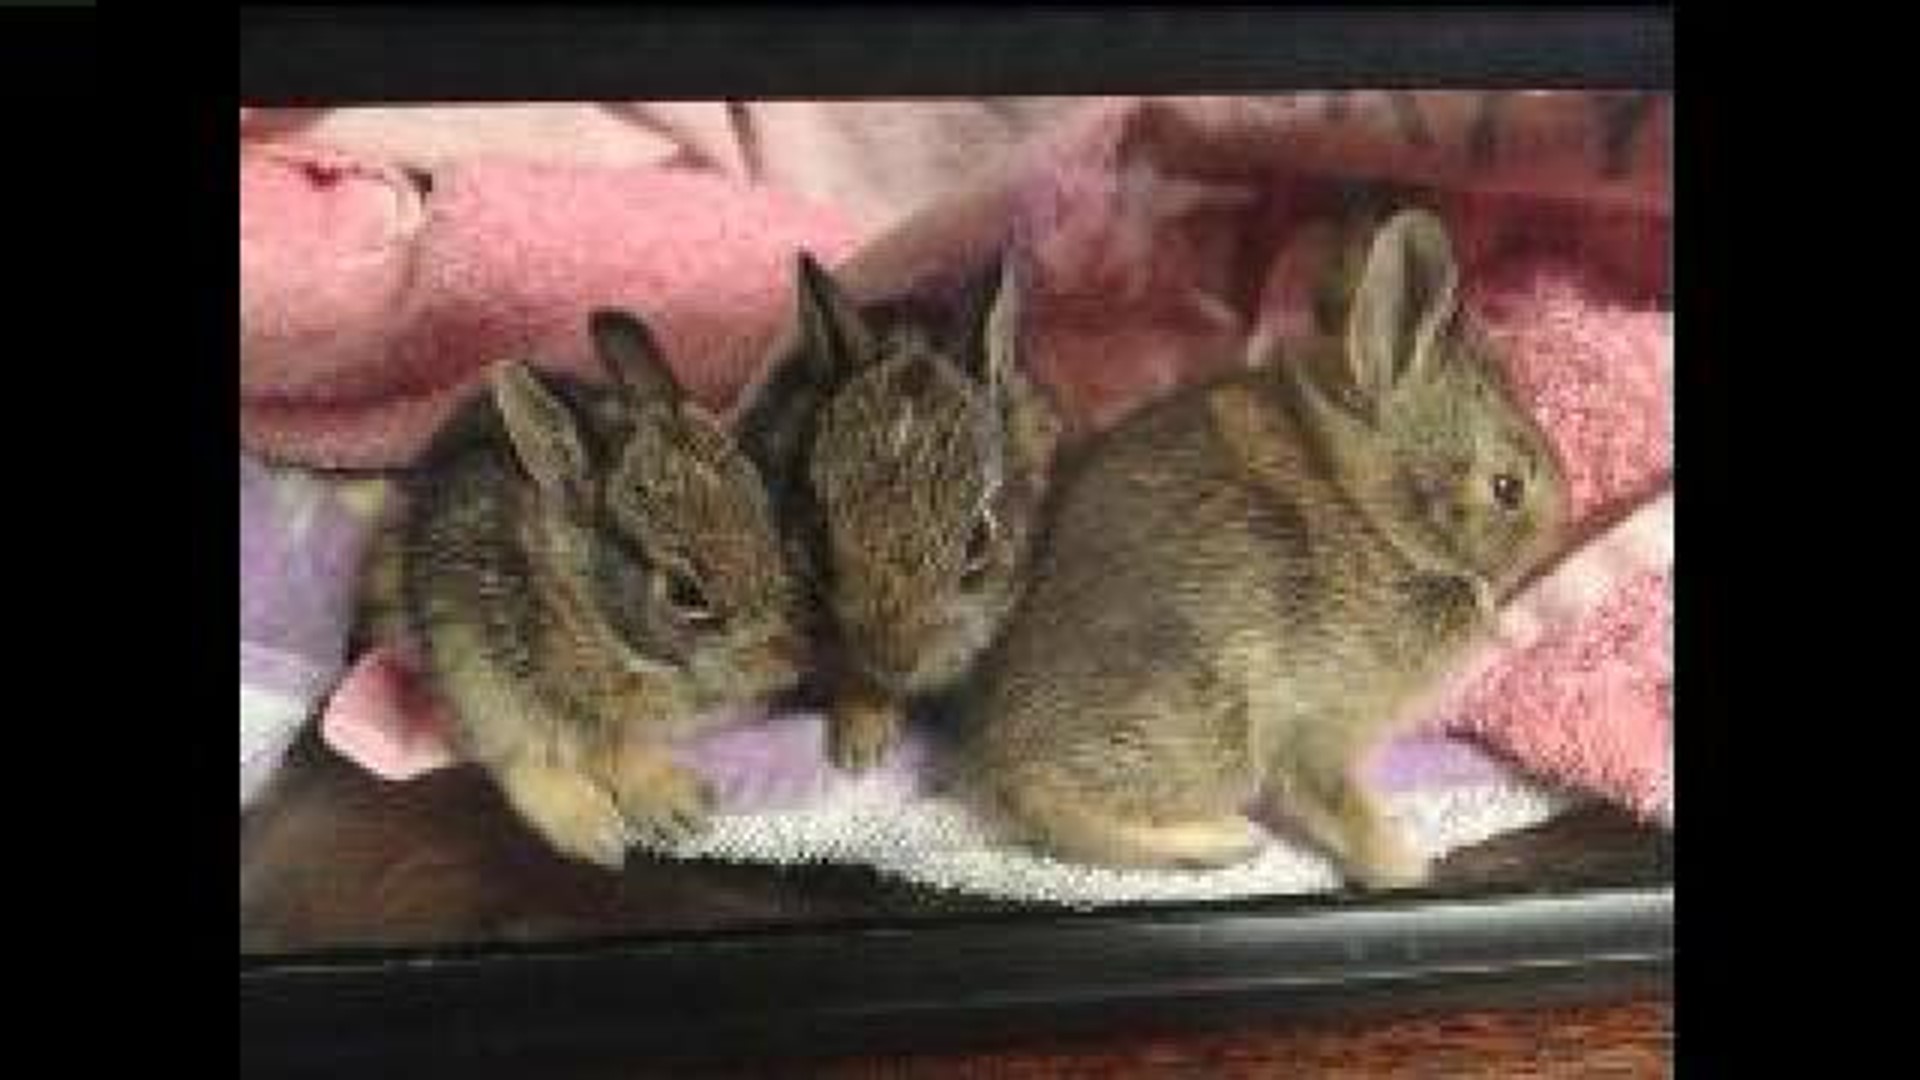 Bunnies Rescued From Cruelty At Football Game